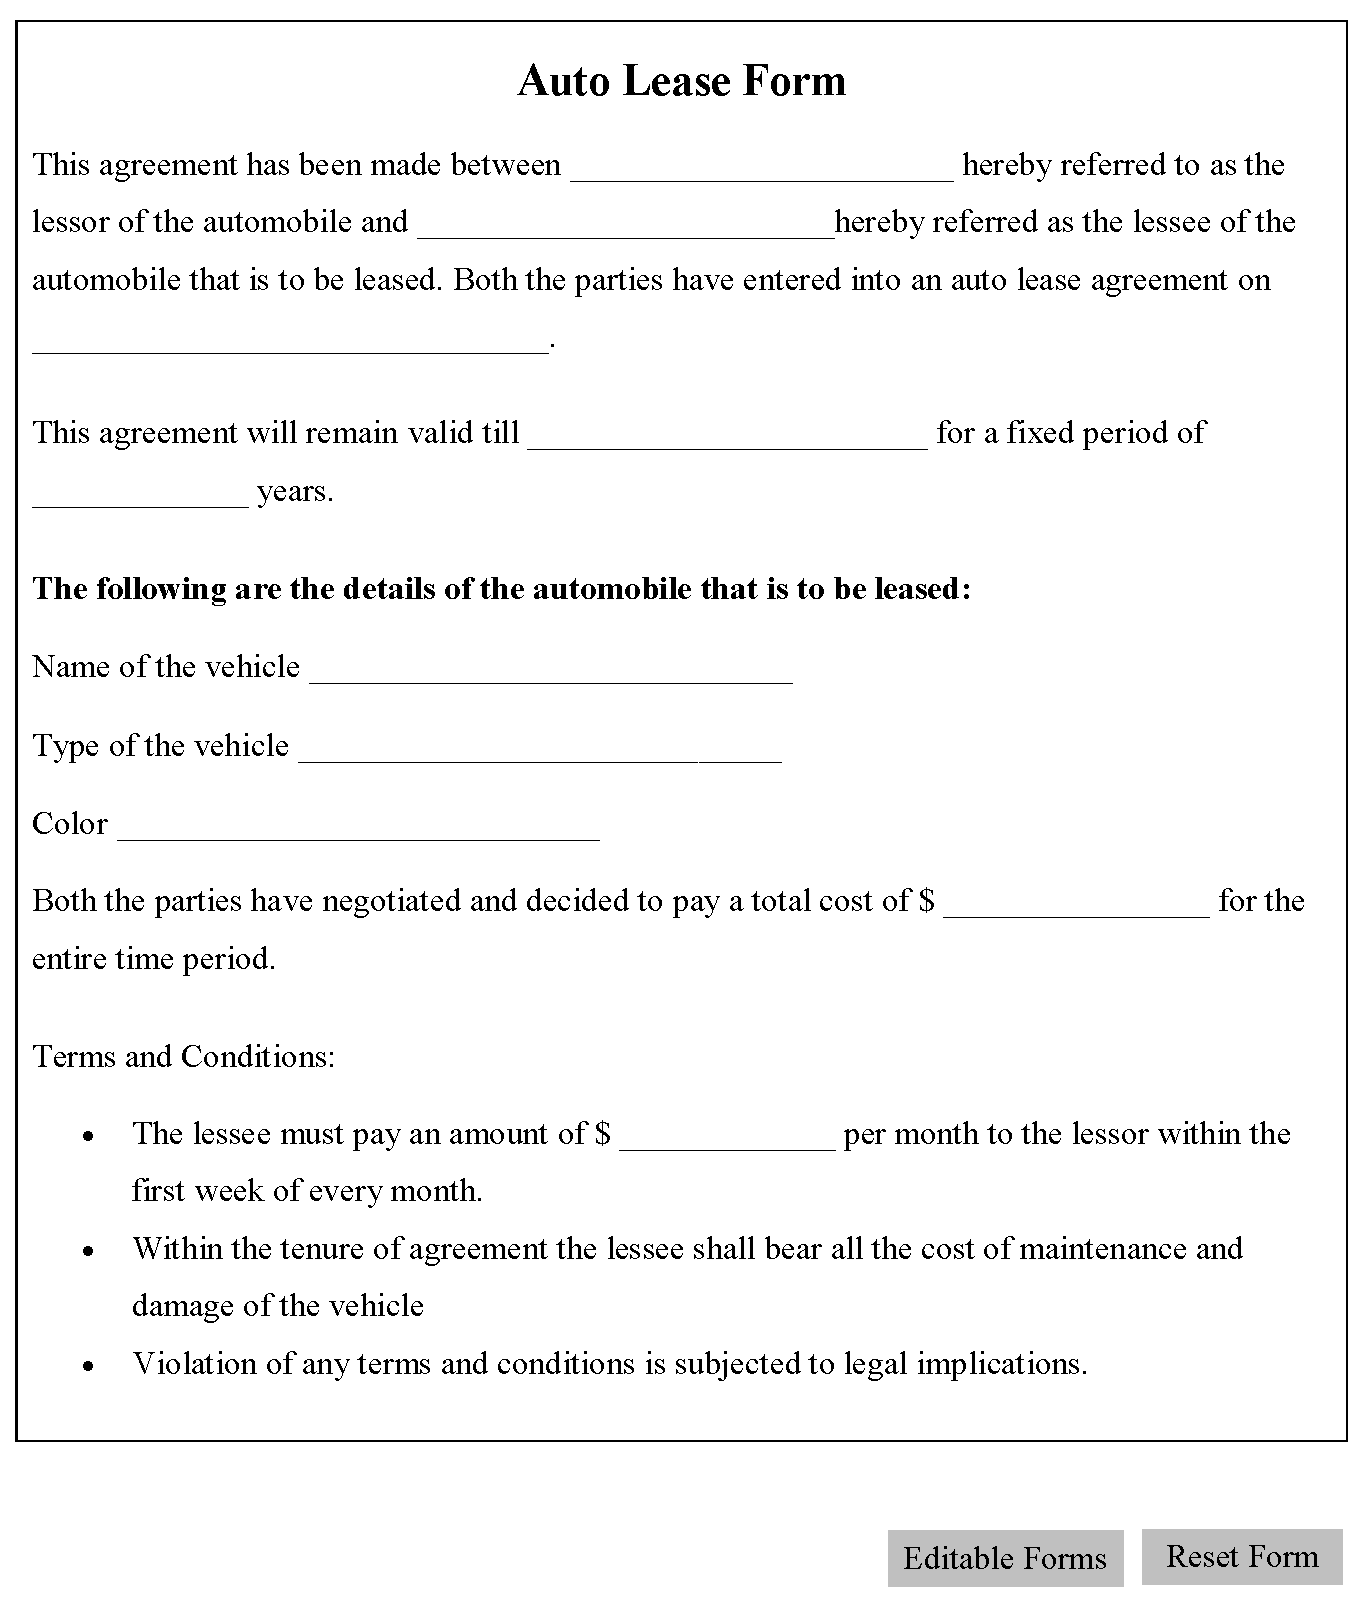 Auto Lease Form